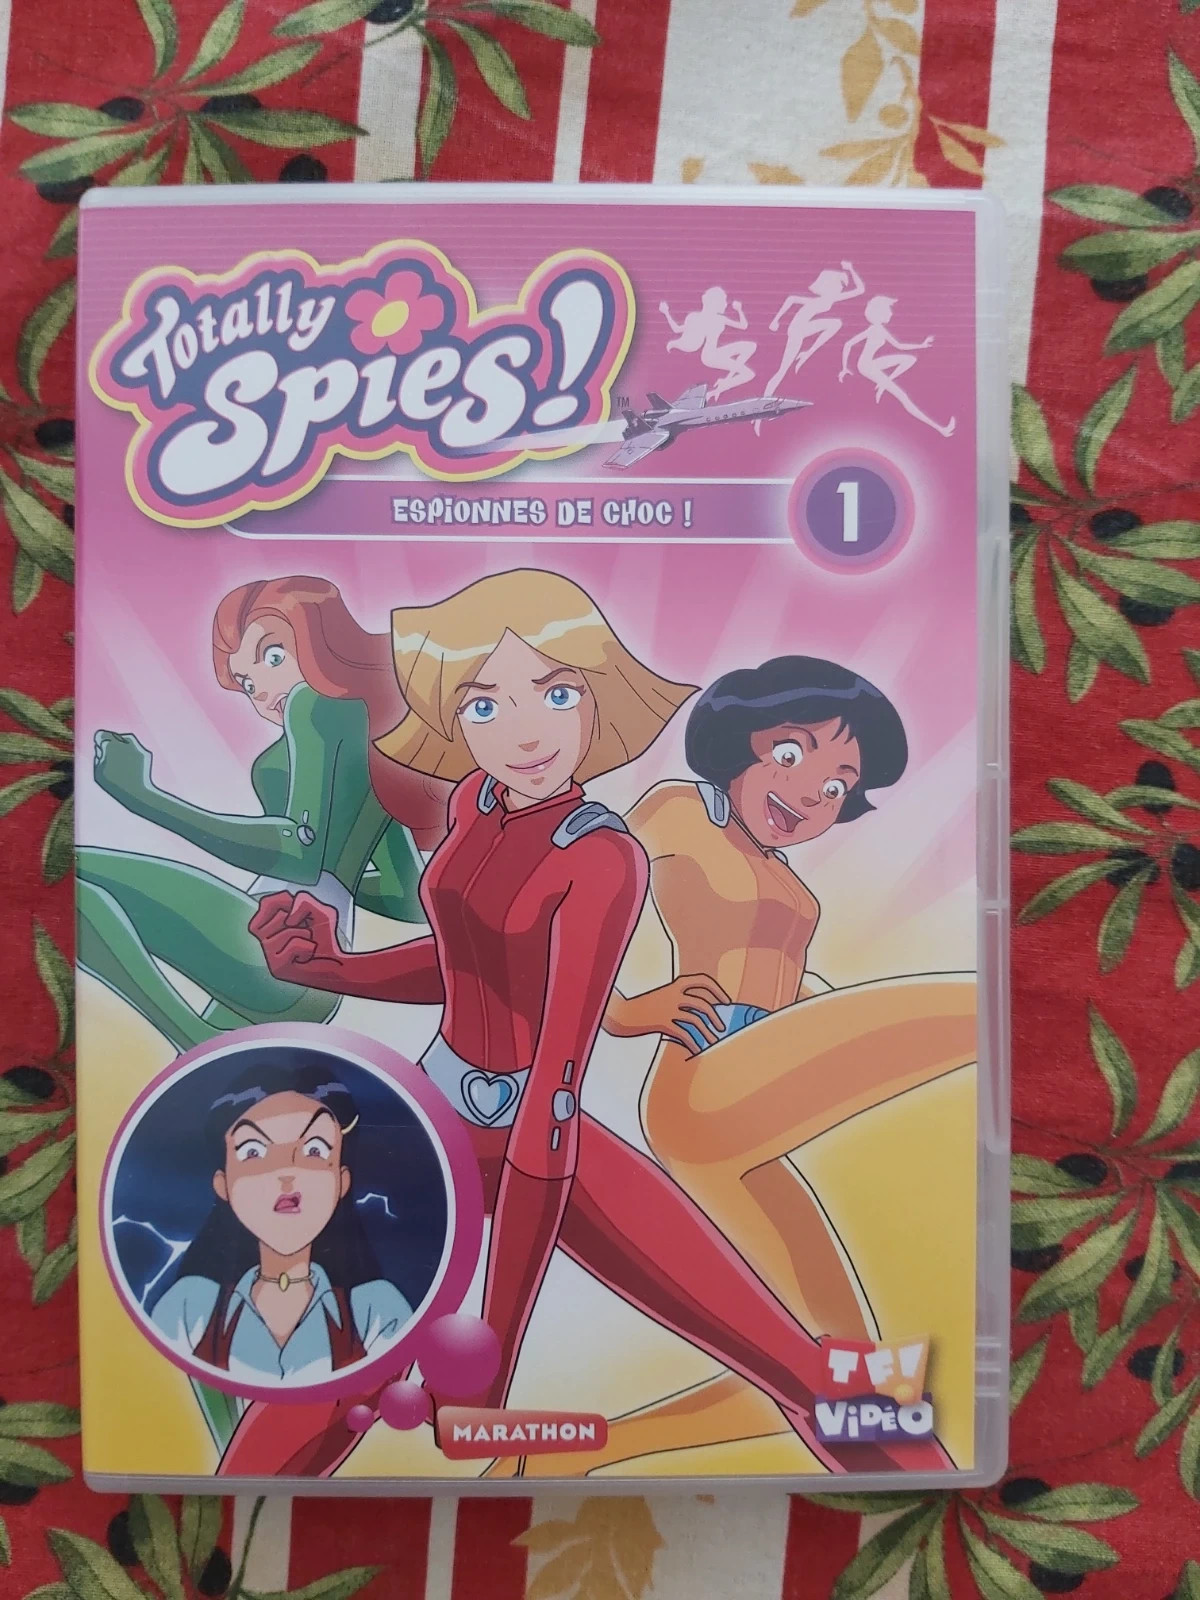 Totally Spies Dvd | Vinted